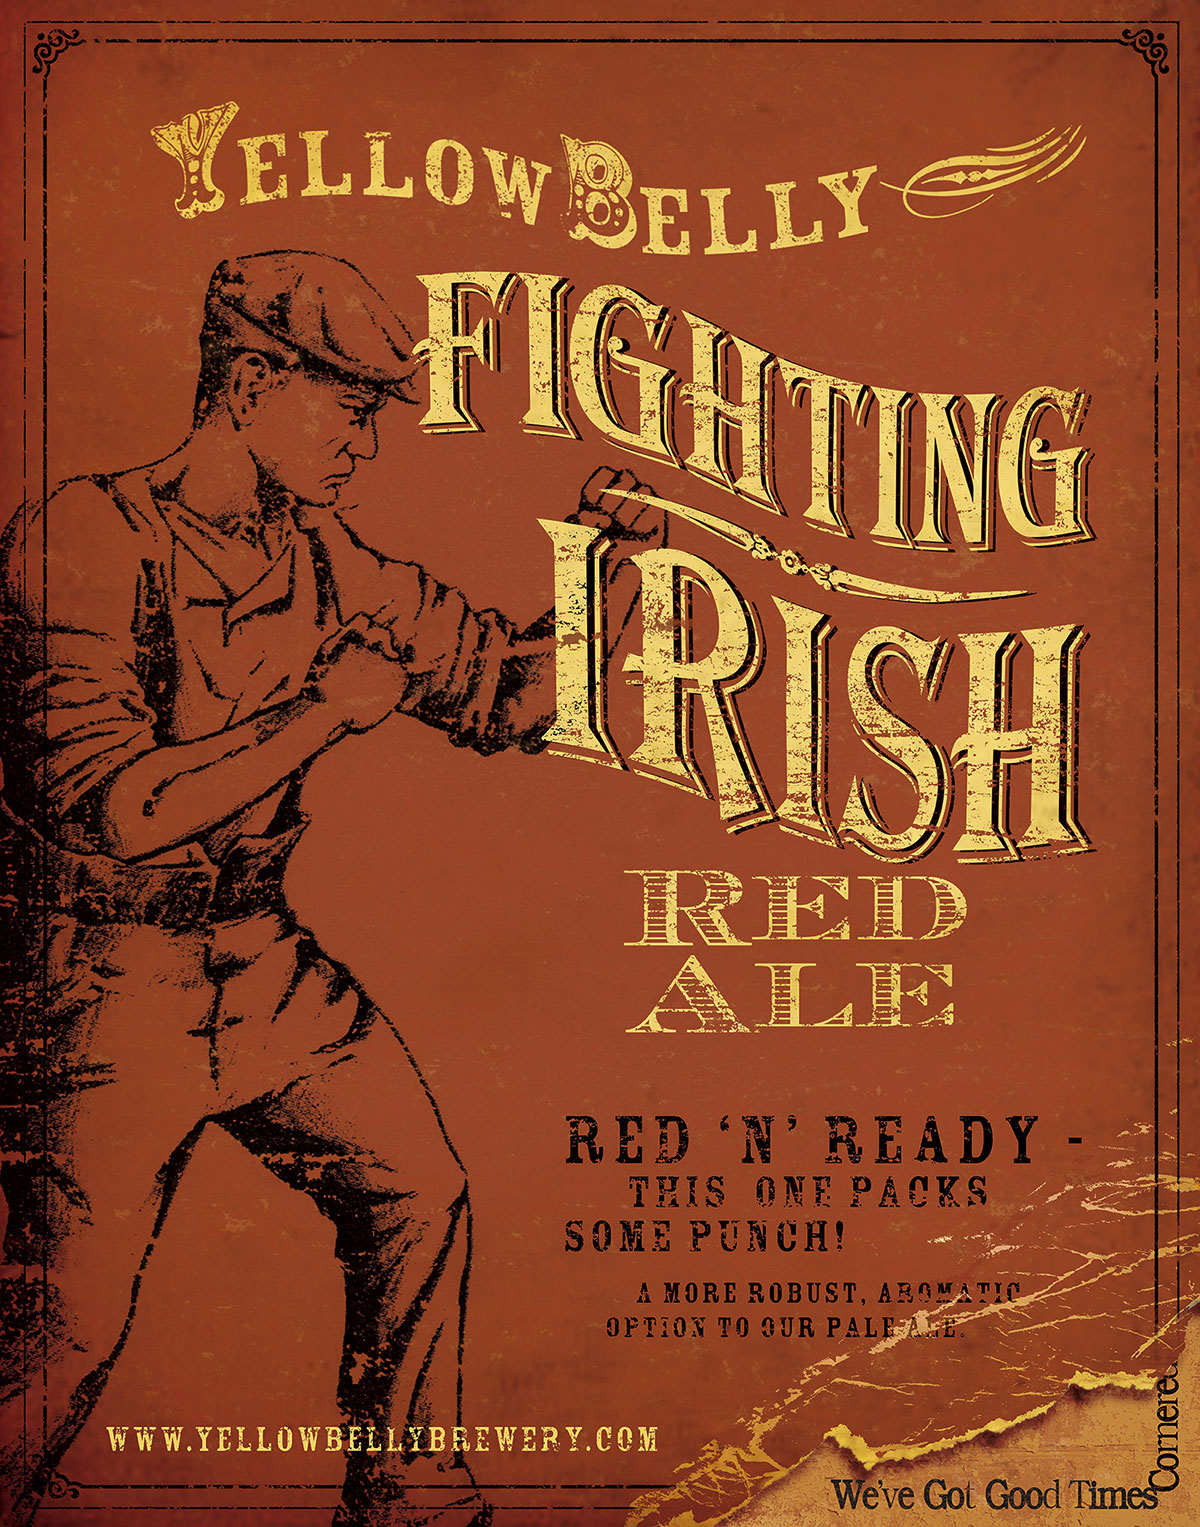 https://www.yellowbellybrewery.com/wp-content/uploads/2021/07/YellowBelly-Fighting-Irish-Red-Ale-Poster.jpg